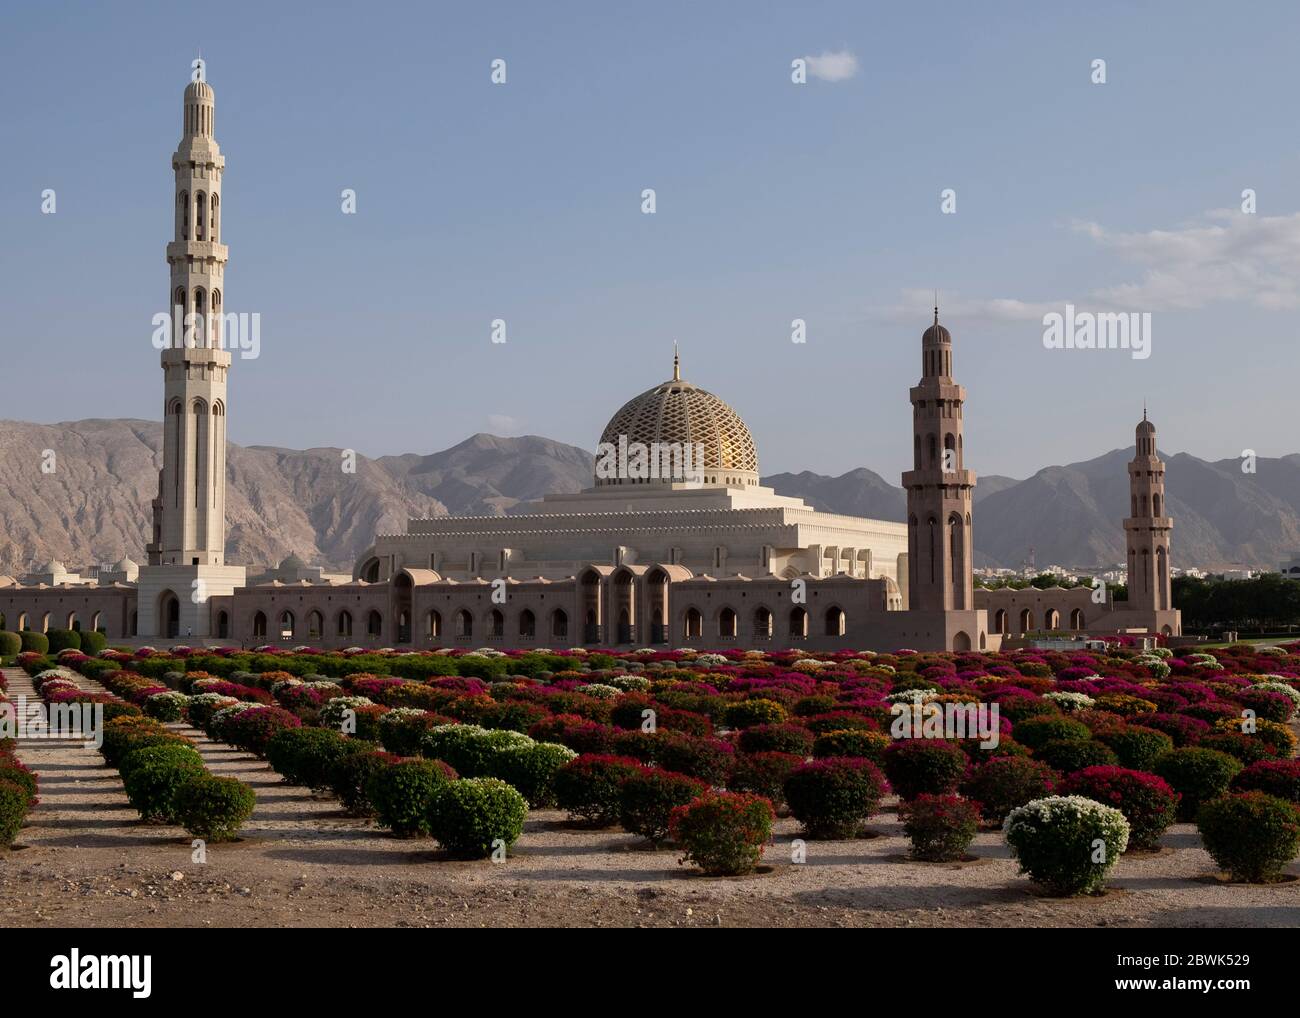 View of Sultan Qaboos Grand Mosque in Muscat, Oman Stock Photo